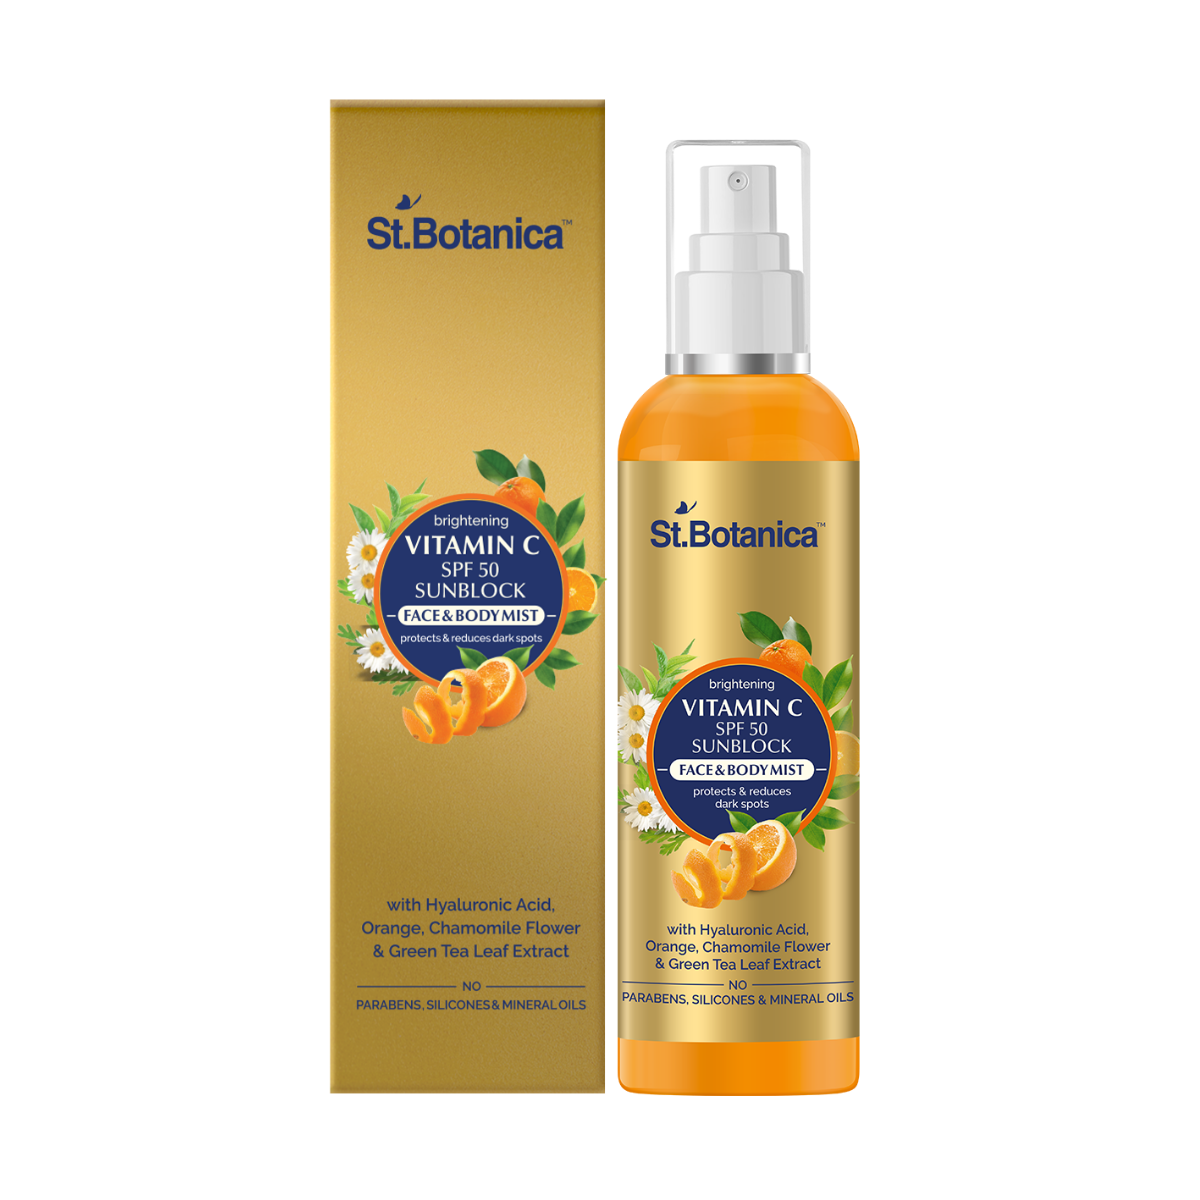 St.Botanica Vitamin C SPF 50 Sunblock Face and Body Mist Sunscreen Spray UVA/UVB Pa+++, Dry Touch, Mineral Based and Water Resistant, 120 ml (STBOT585)